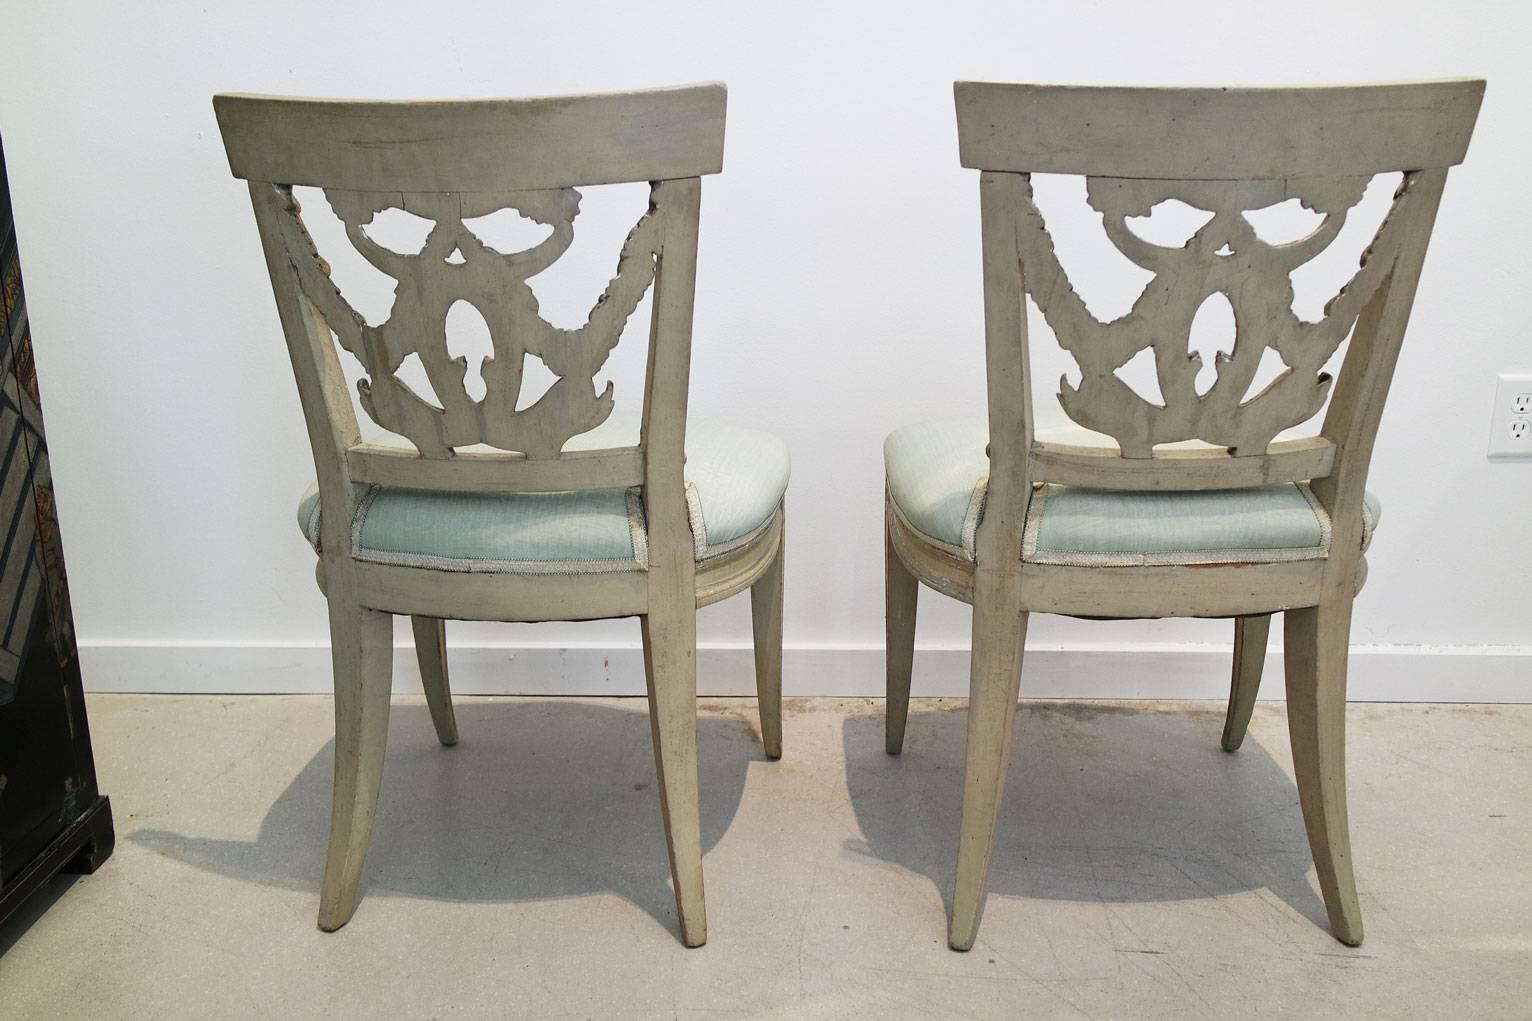 Giltwood Pair of Italian Neoclassical Painted and Partial Gilt Side Chairs